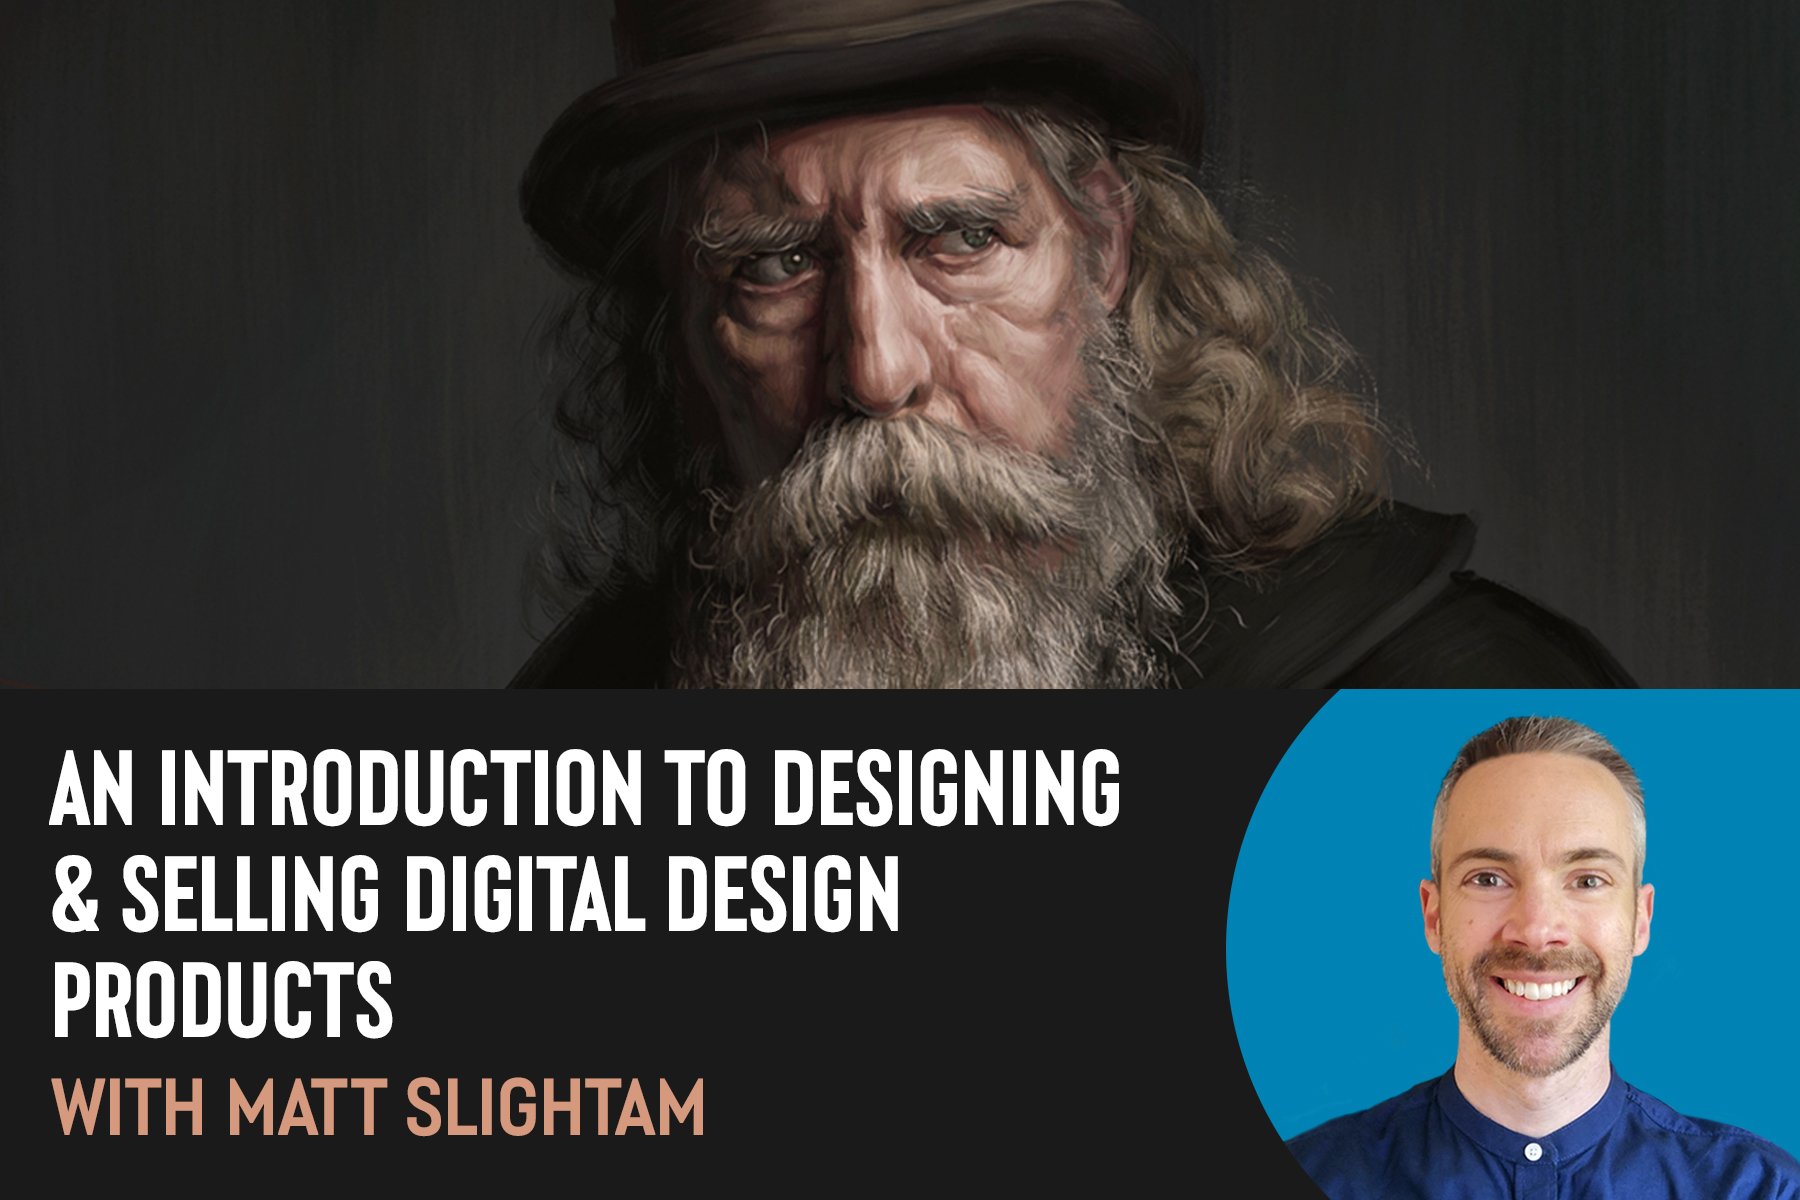 An Introduction to Designing & Selling Digital Design Products